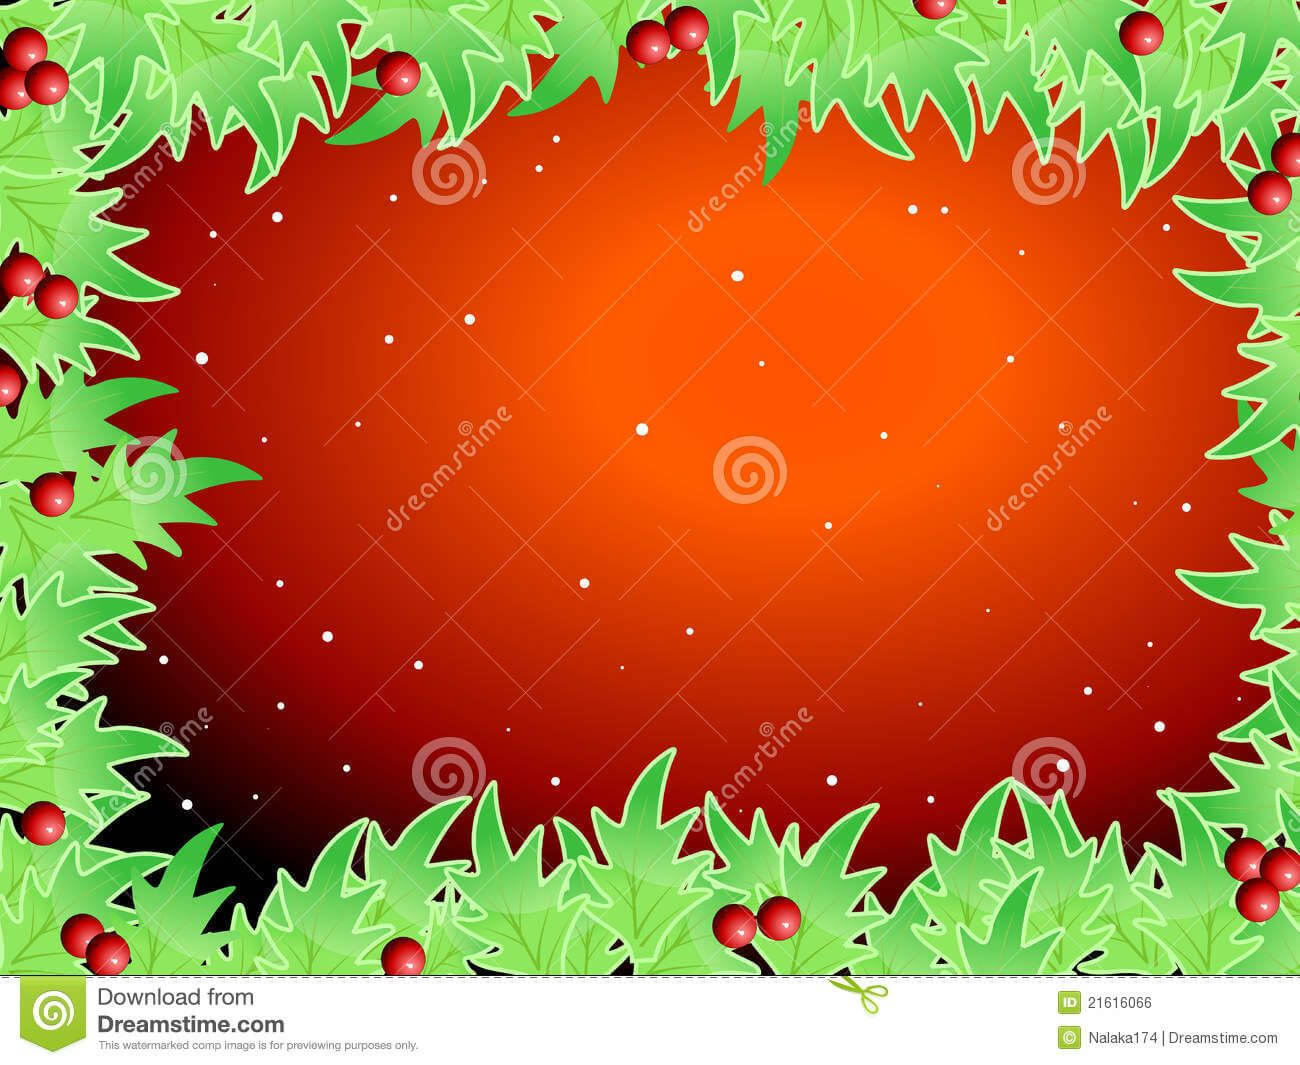 Blank Template For Christmas Greetings Card Royalty Free In Blank Christmas Card Templates Free